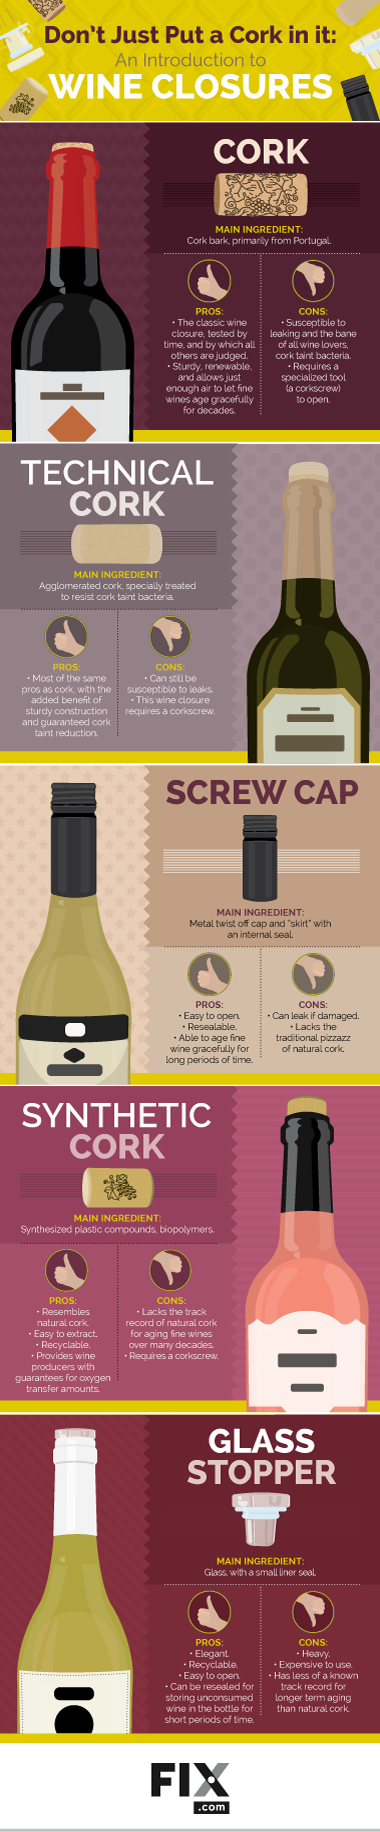 Three Studies Take A Look At Various Wine Bottle Closure Preferences